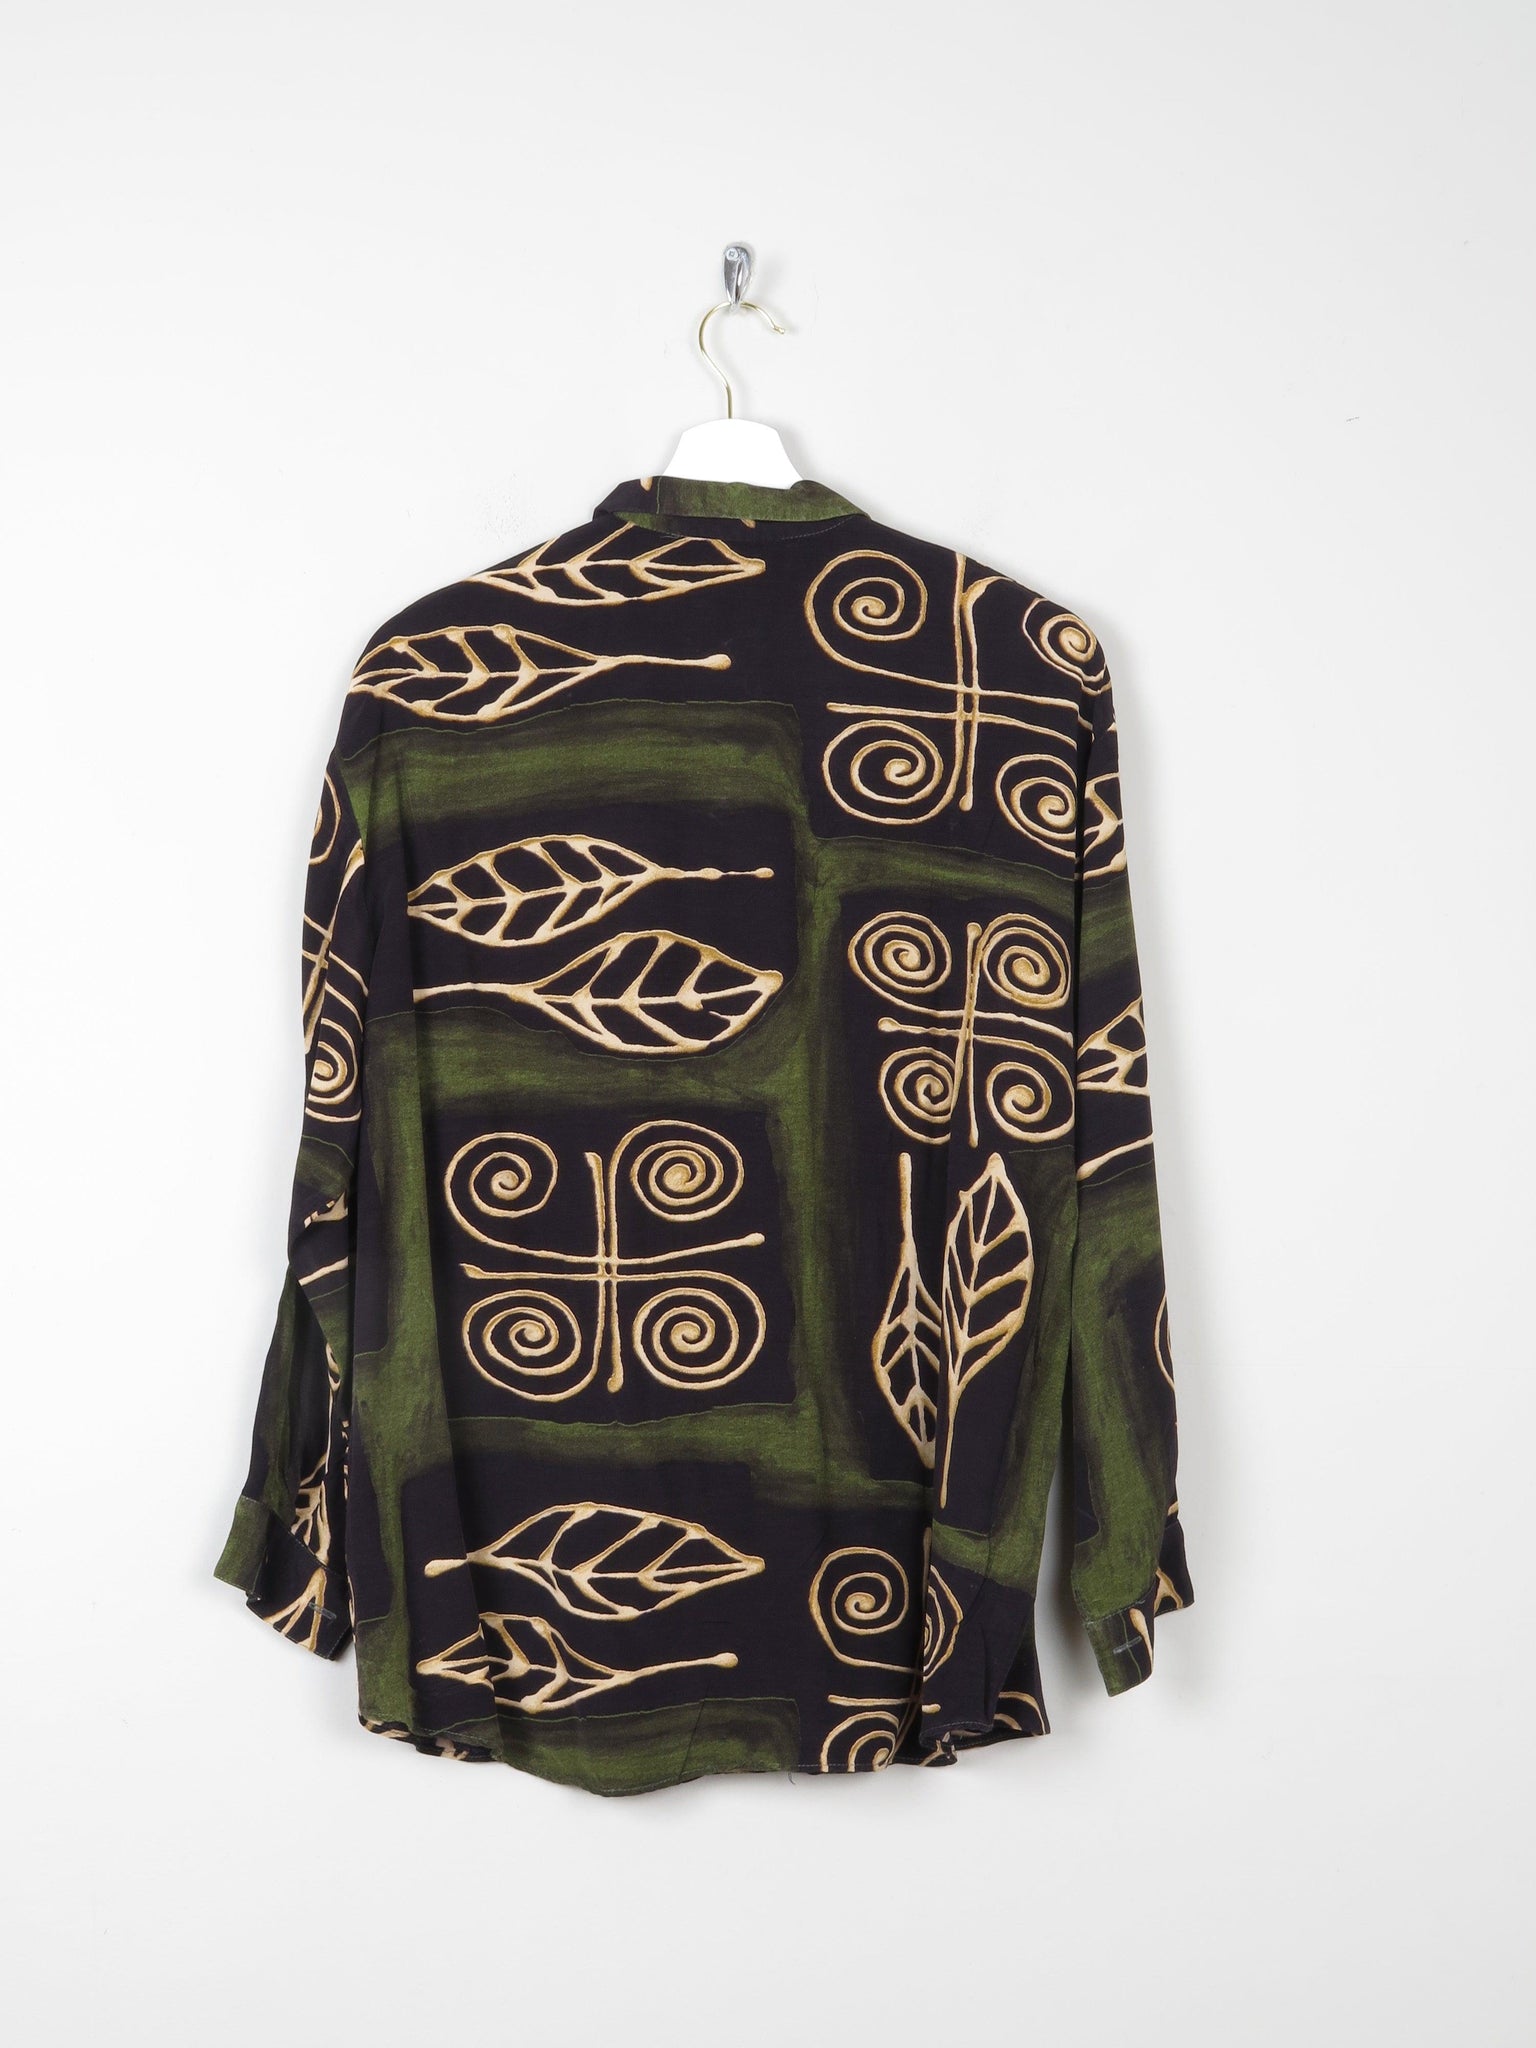 Women’s Green Vintage Printed Blouse With Collar S/M - The Harlequin